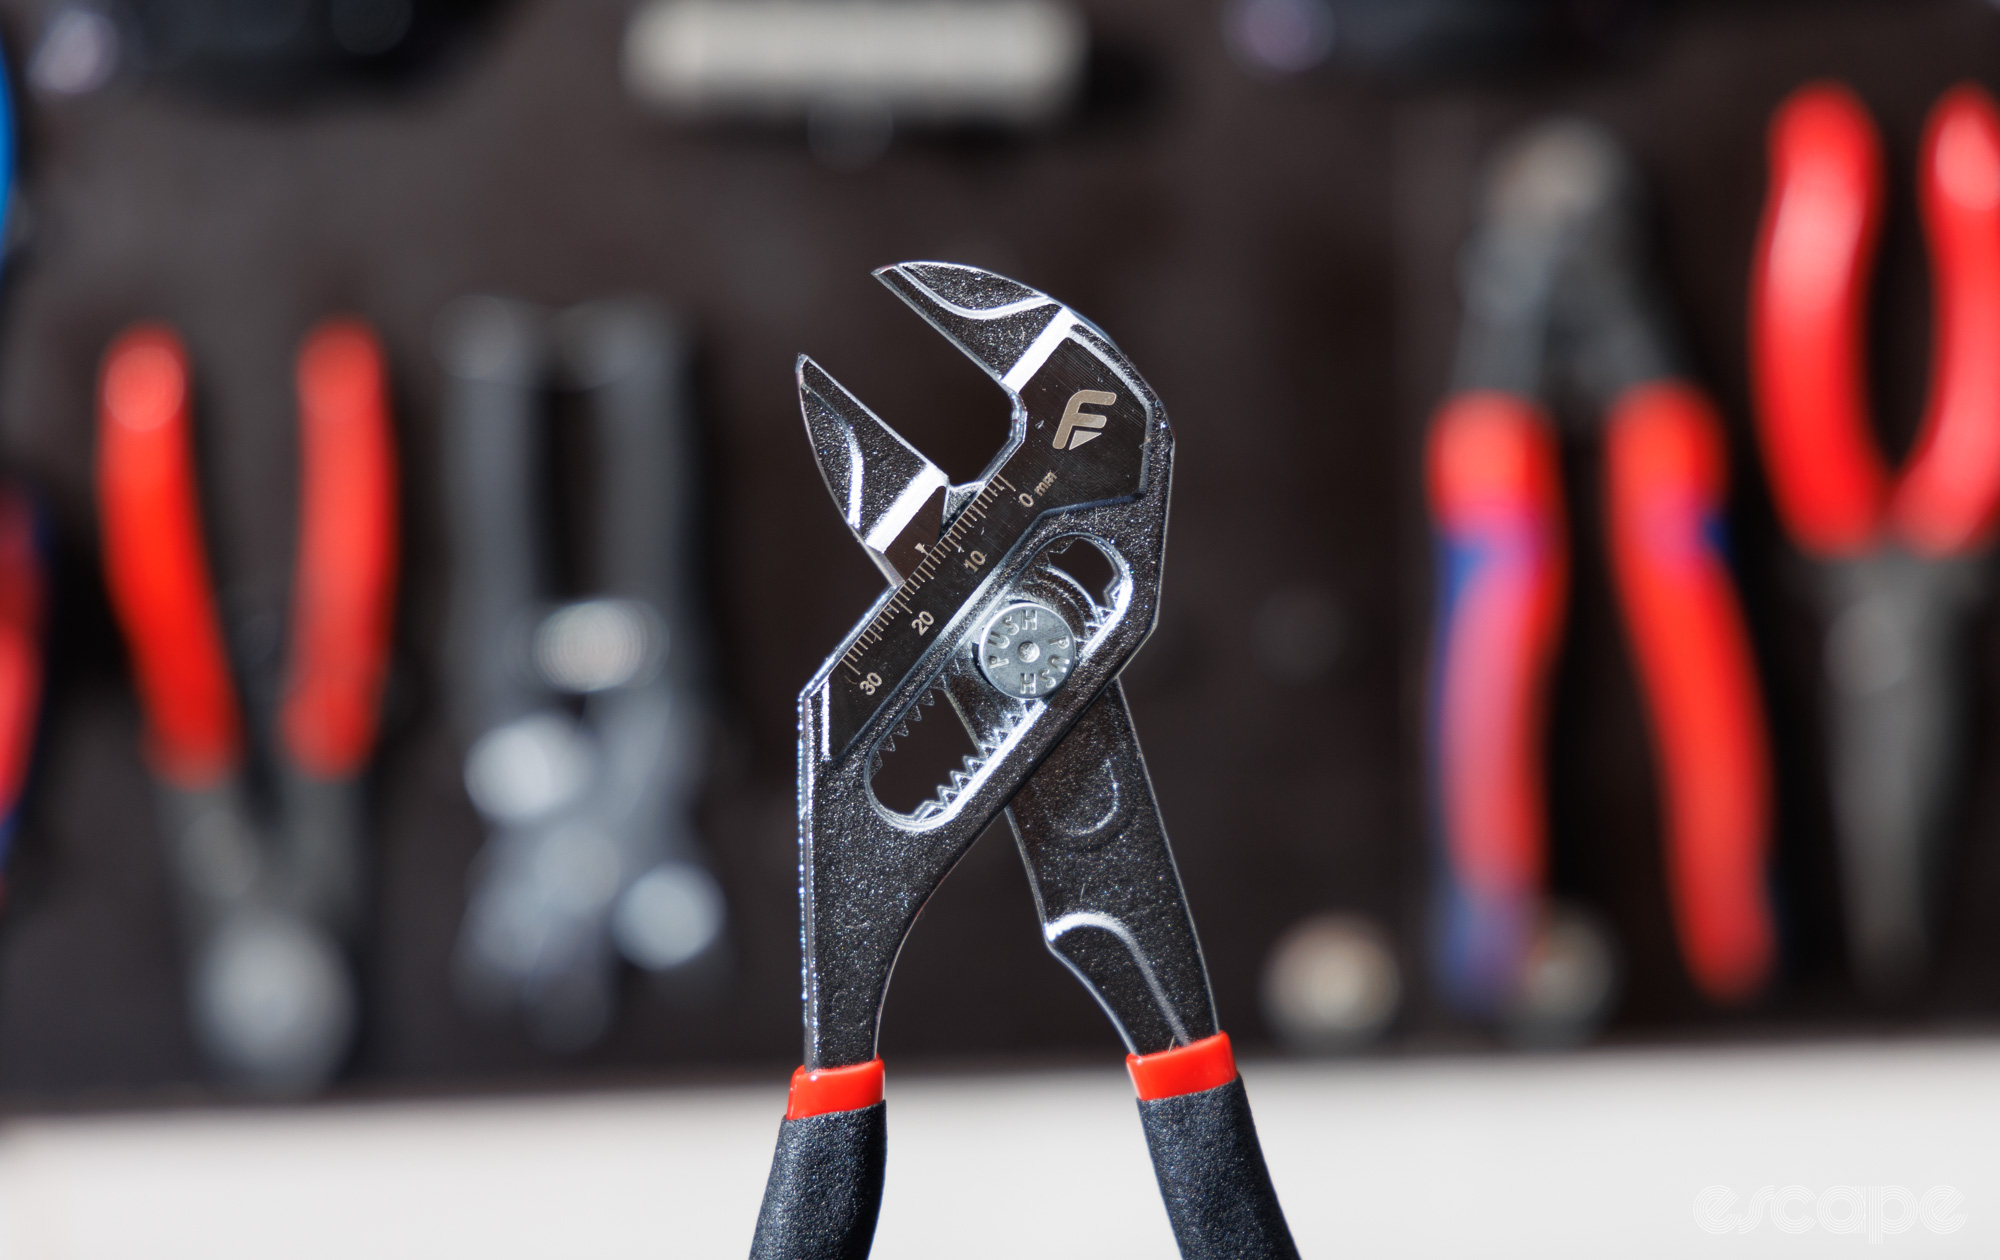 Feedback Sports Pliers Wrench, with the image showing the clear etched size markings on the tool. 